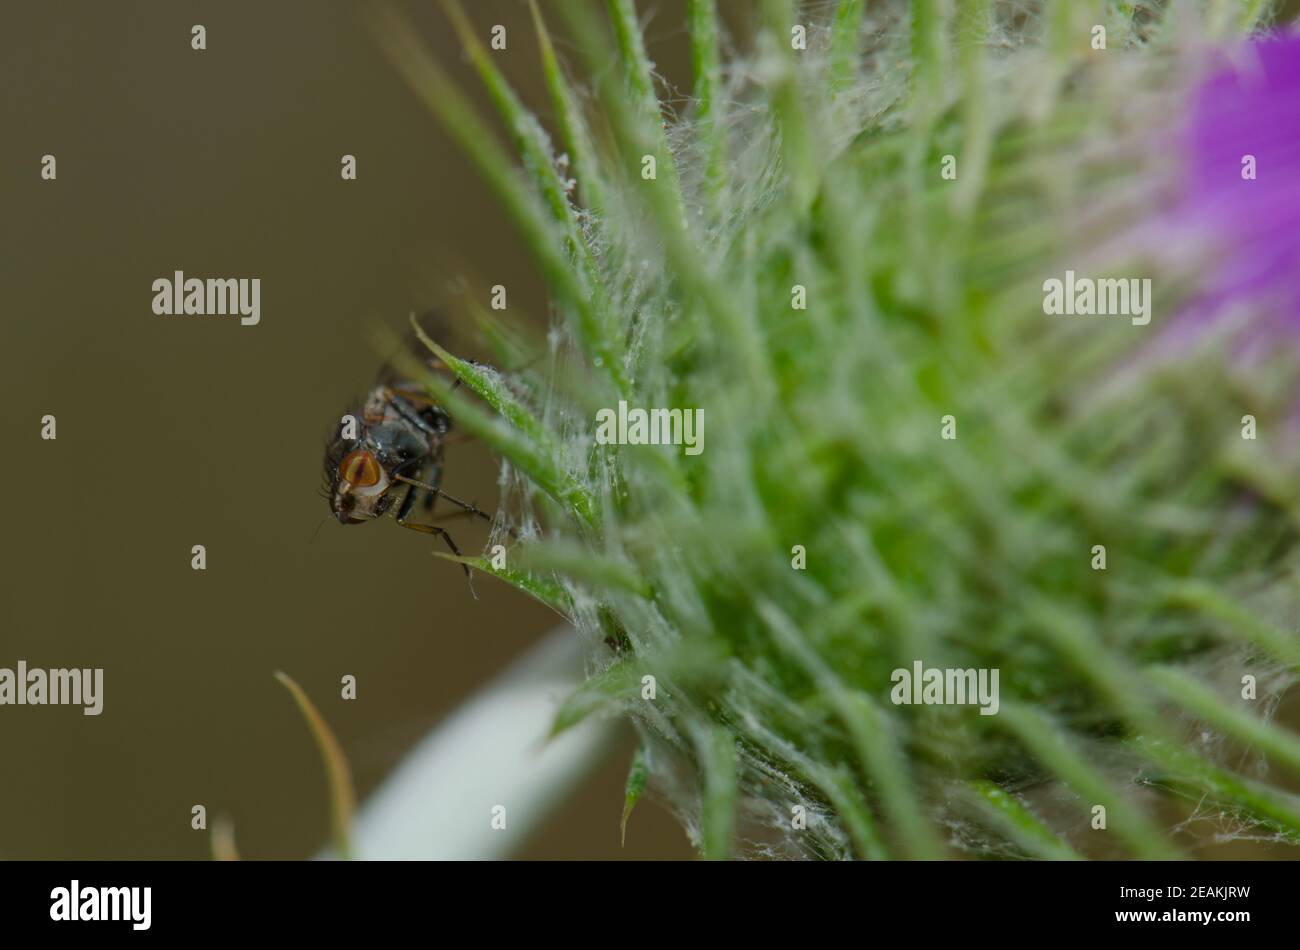 Fly on a flower of a purple milk thistle Galactites tomentosa. Stock Photo